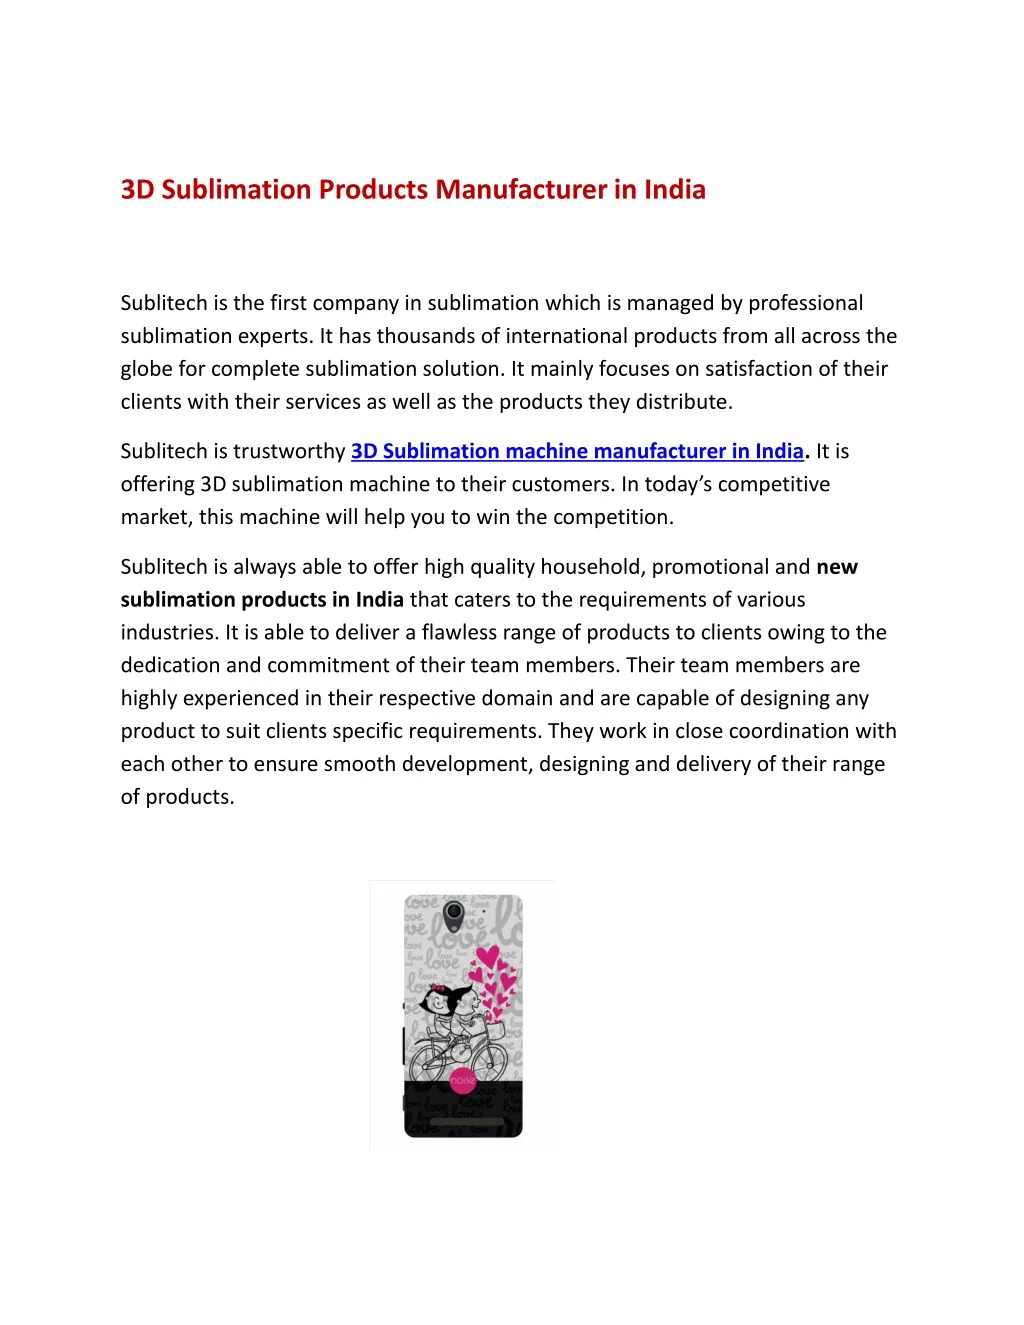 3d sublimation products manufacturer in india